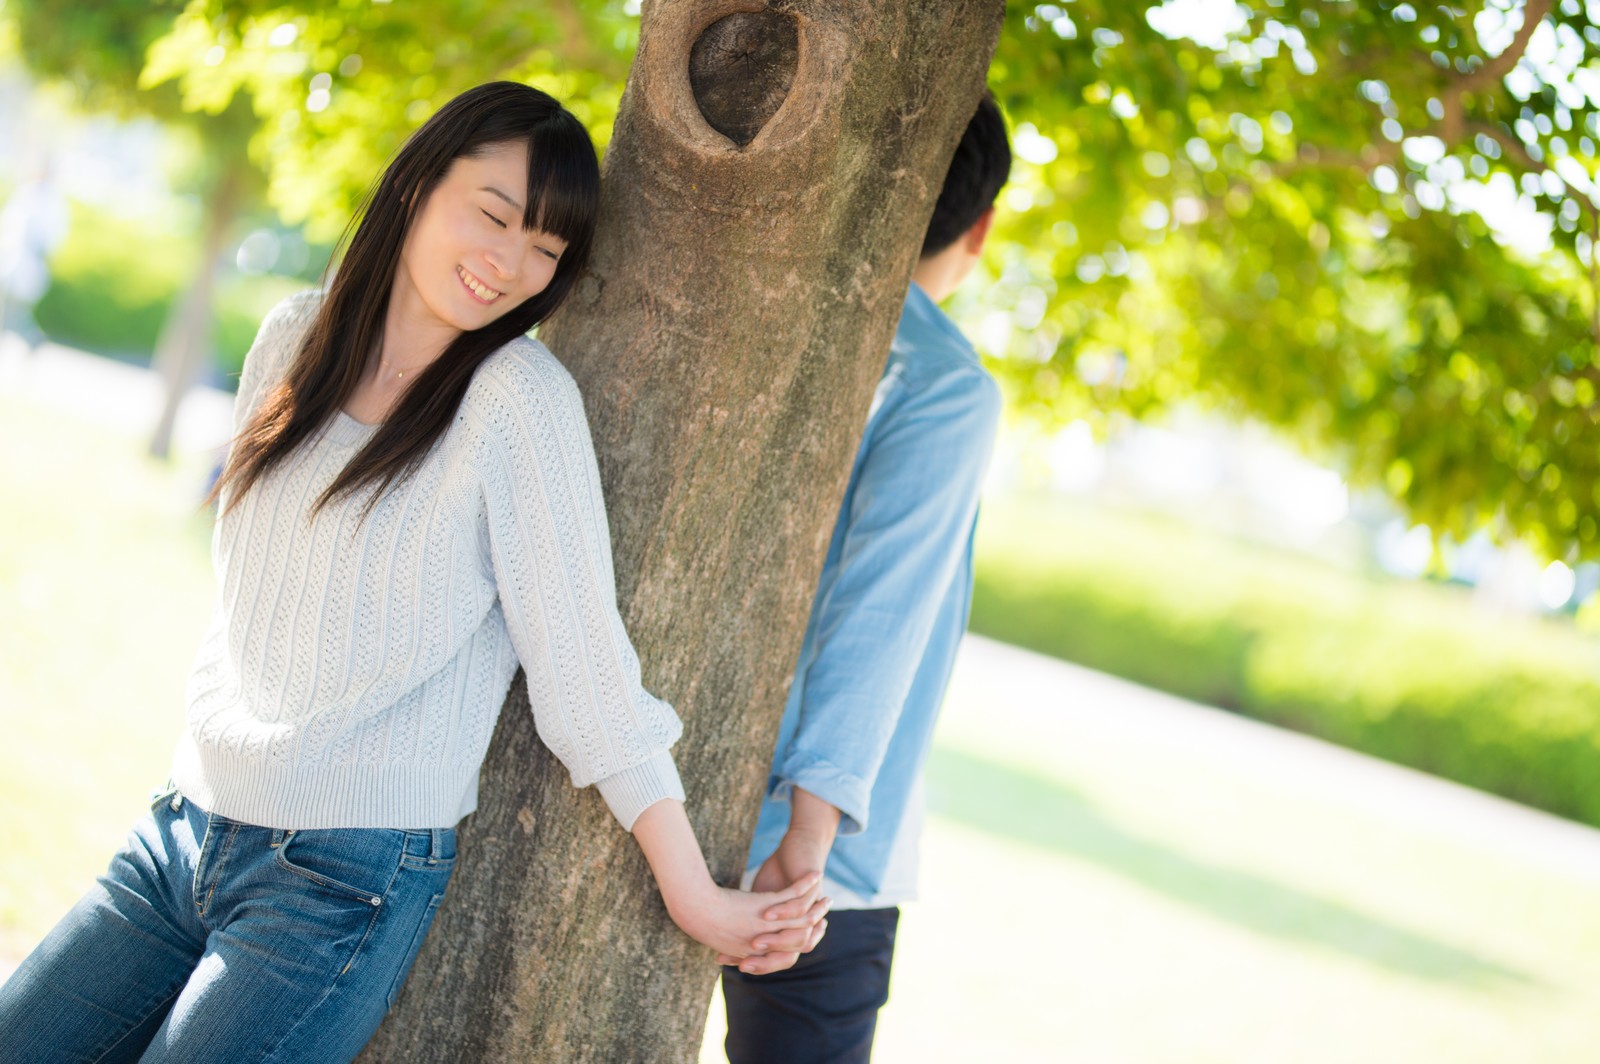 Good Couples Day gets our Japanese writer thinking about